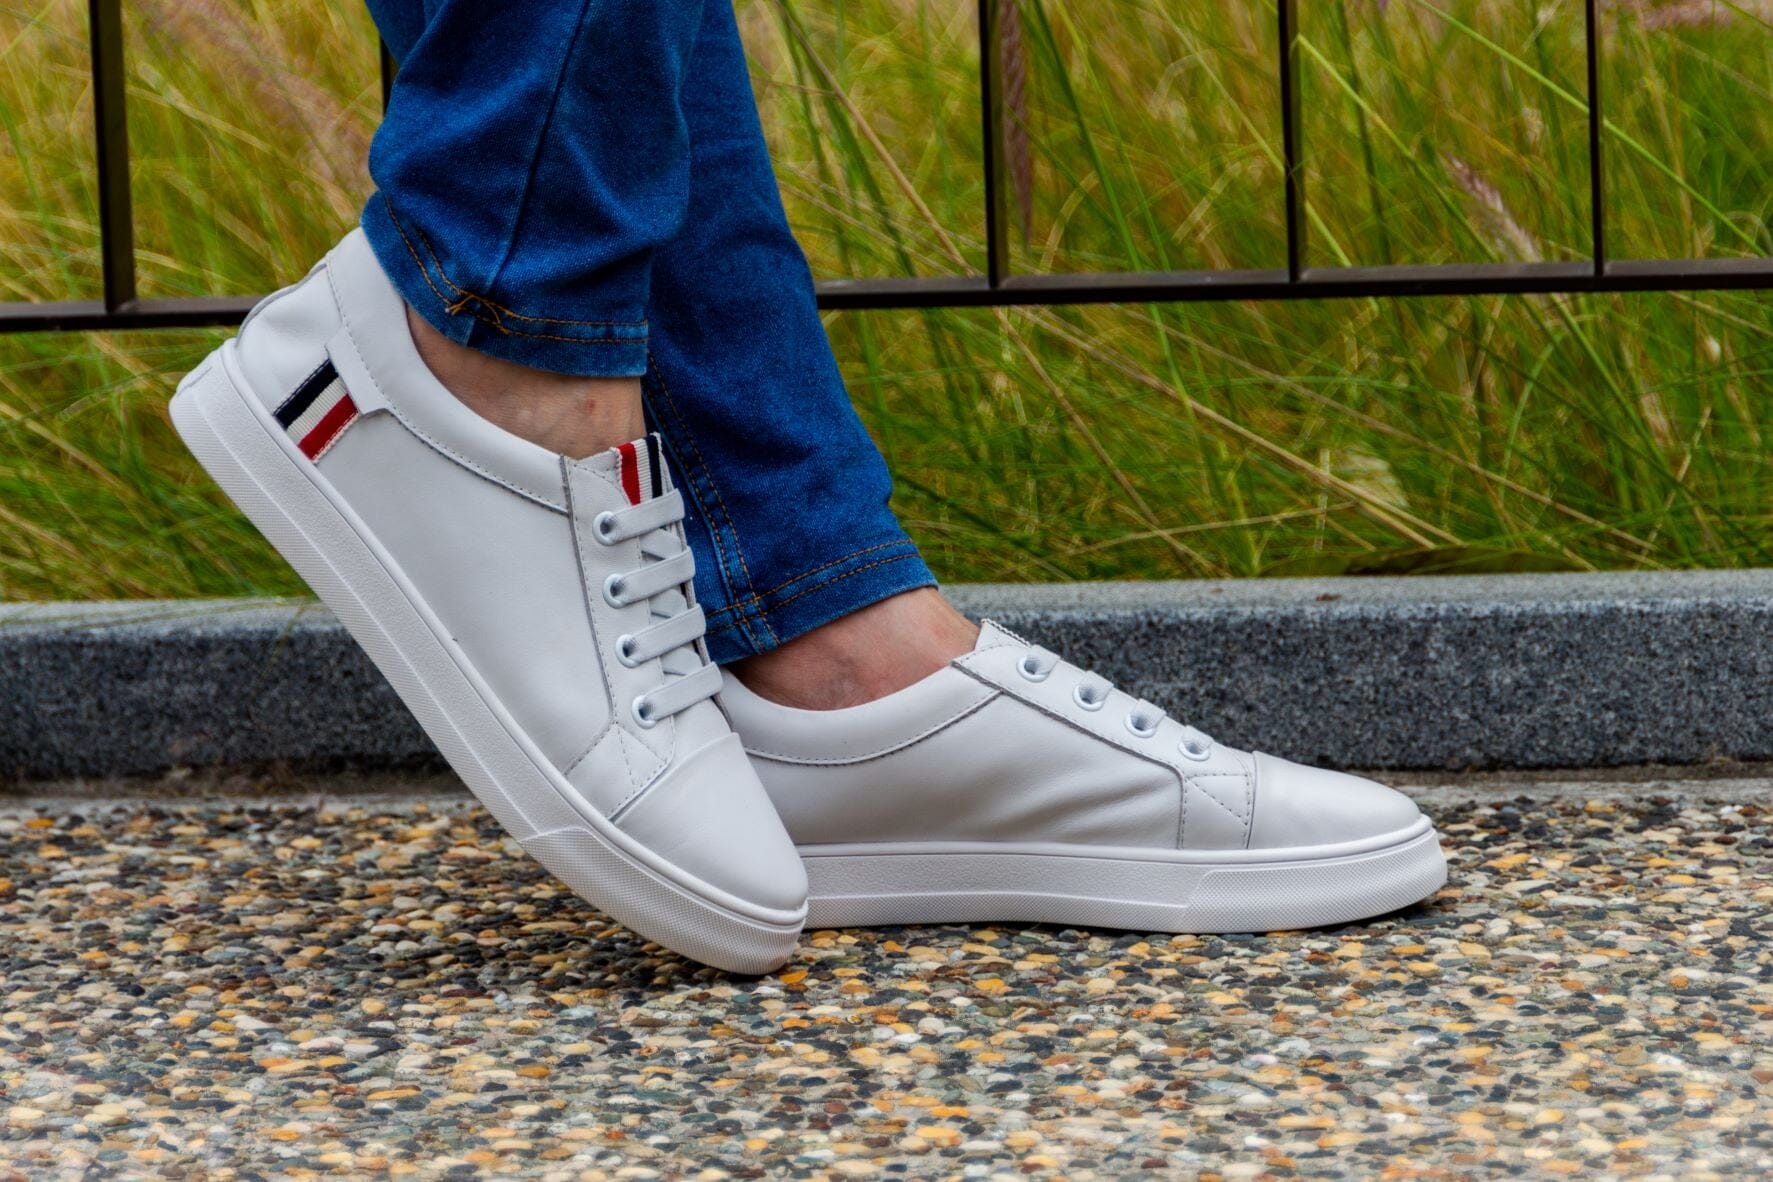 SS22003 Genuine leather sneakers with extra cushions- White with Blue/Red ribbons sneakers Sam Star Shoes 